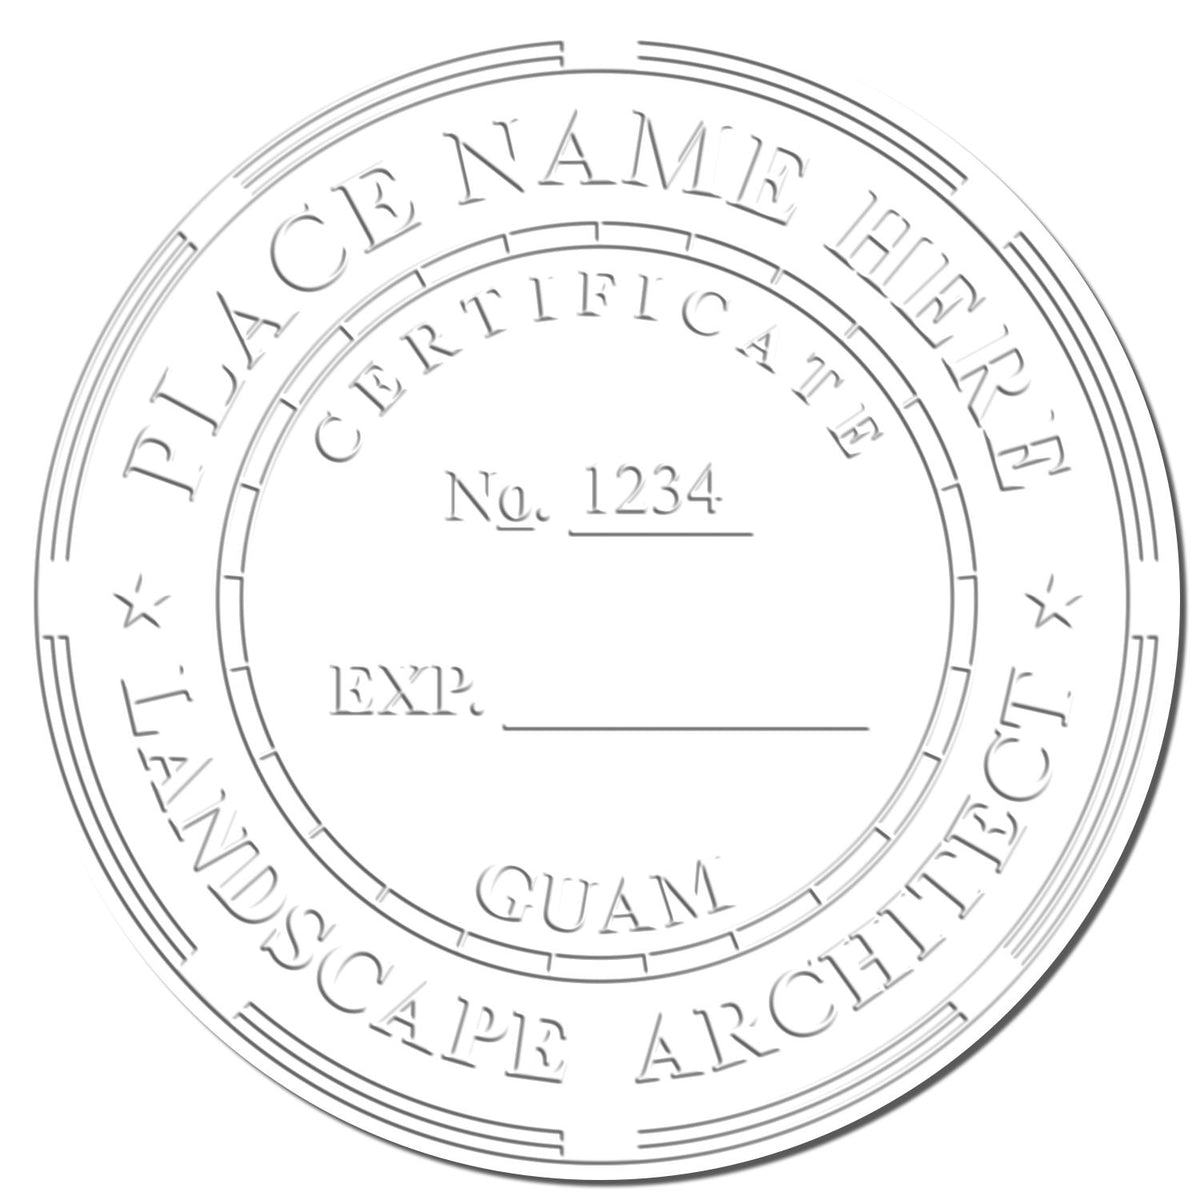 This paper is stamped with a sample imprint of the Gift Guam Landscape Architect Seal, signifying its quality and reliability.